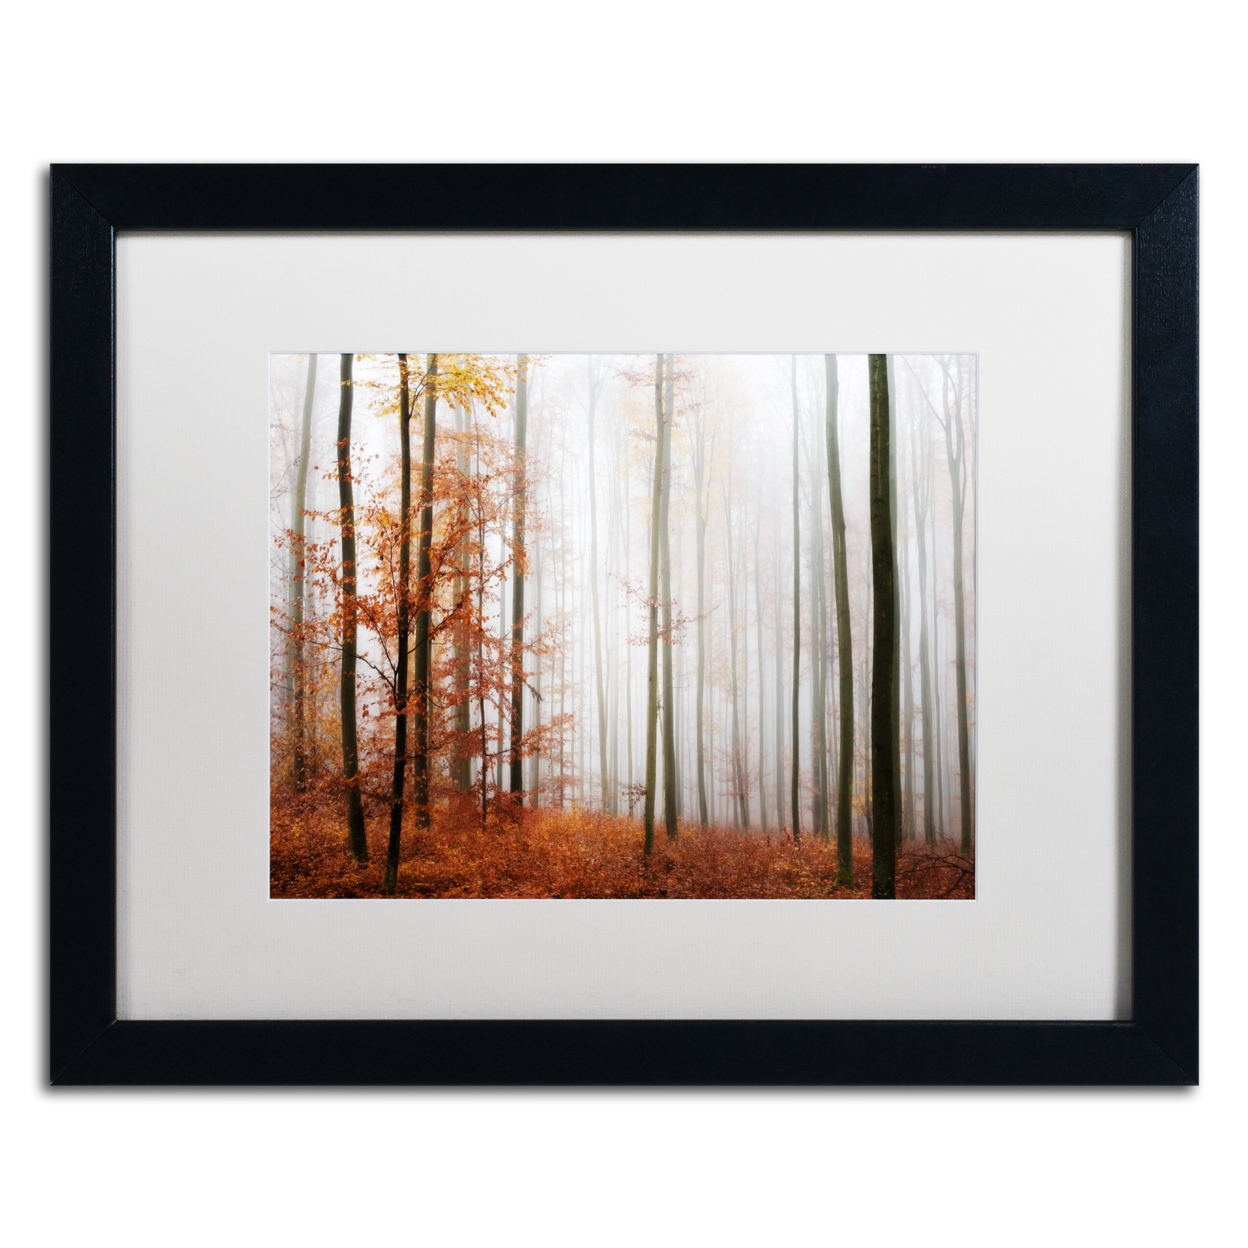 Philippe Sainte-Laudy 'Forest Corner' Black Wooden Framed Art 18 X 22 Inches